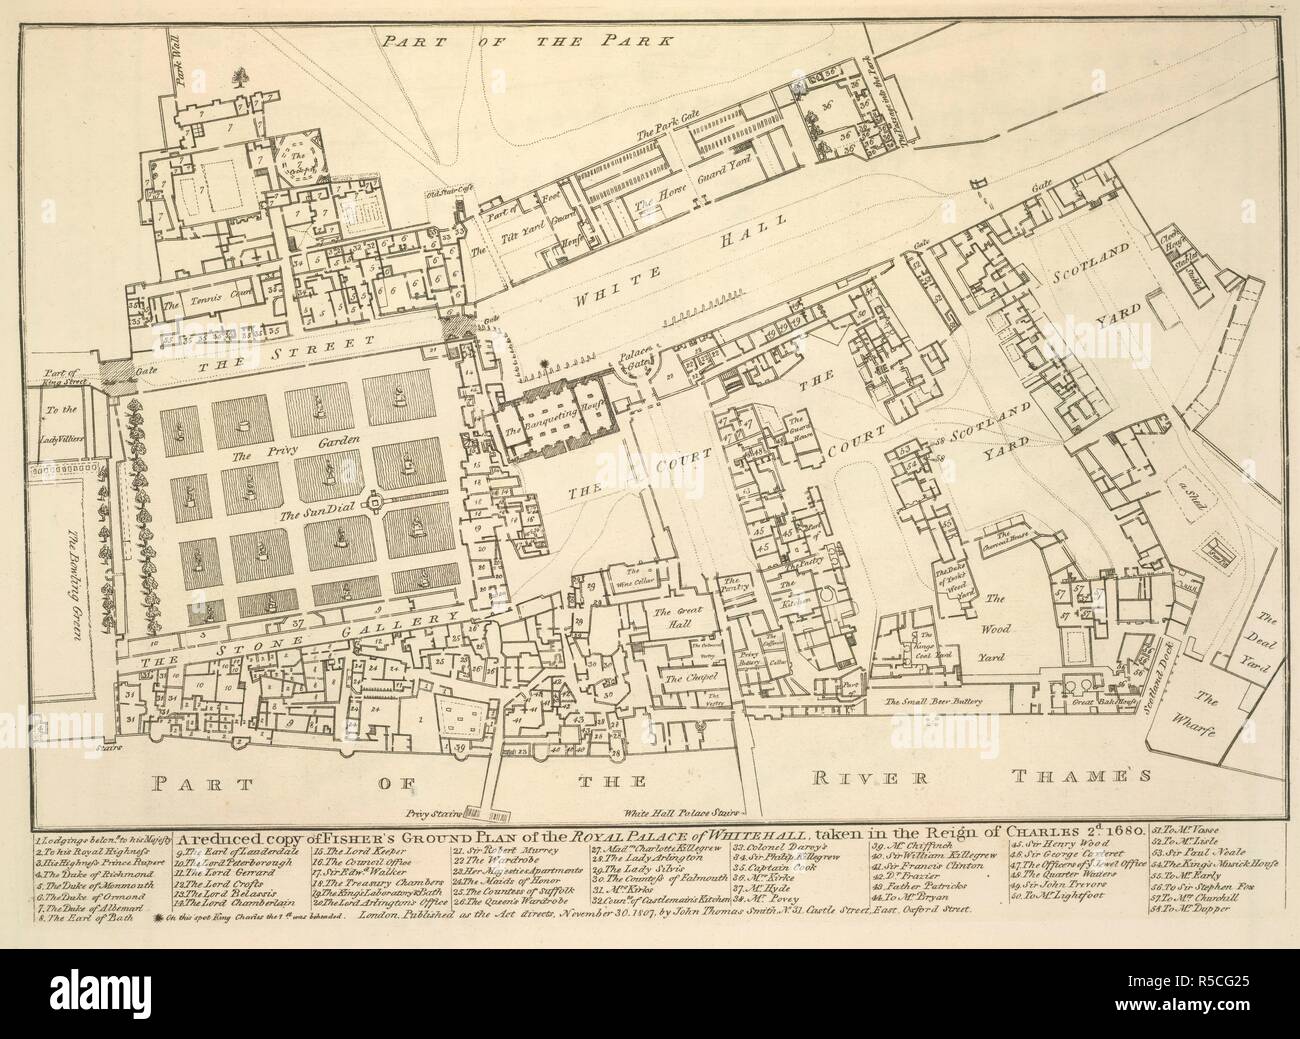 A reduced copy of Fisher's ground plan of the Royal Palace of Whitehall, taken in the reign of Charles 2nd 1680. Antiquities of Westminster; the old Palace; St. Stephen's Chapel (now the House of Commons), &c. containing two hundred and forty-six engravings of topographical objects, etc. (Sixty two additional plates, etc.). London, 1807-09. Source: 191.e.4, no.26. Language: English. Author: SMITH, JOHN THOMAS. Stock Photo